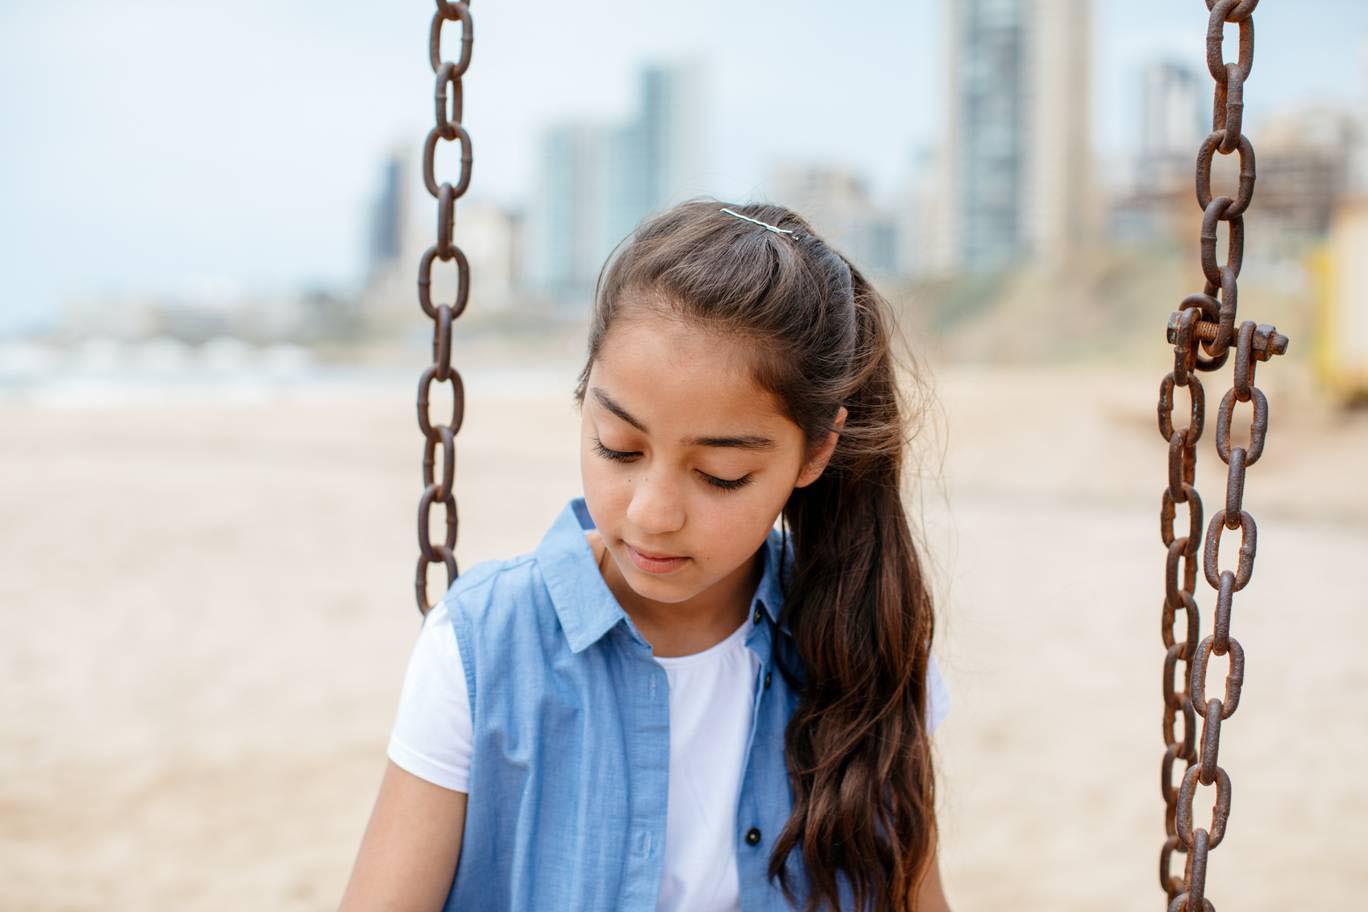 At 11 years old, Sara could never have imagined becoming a refugee. Sitting on a swing in Beirut, she hopes for a better future built on a good education and psychosocial support made possible by EAA and UNRWA - Photo by Paddy Dowling